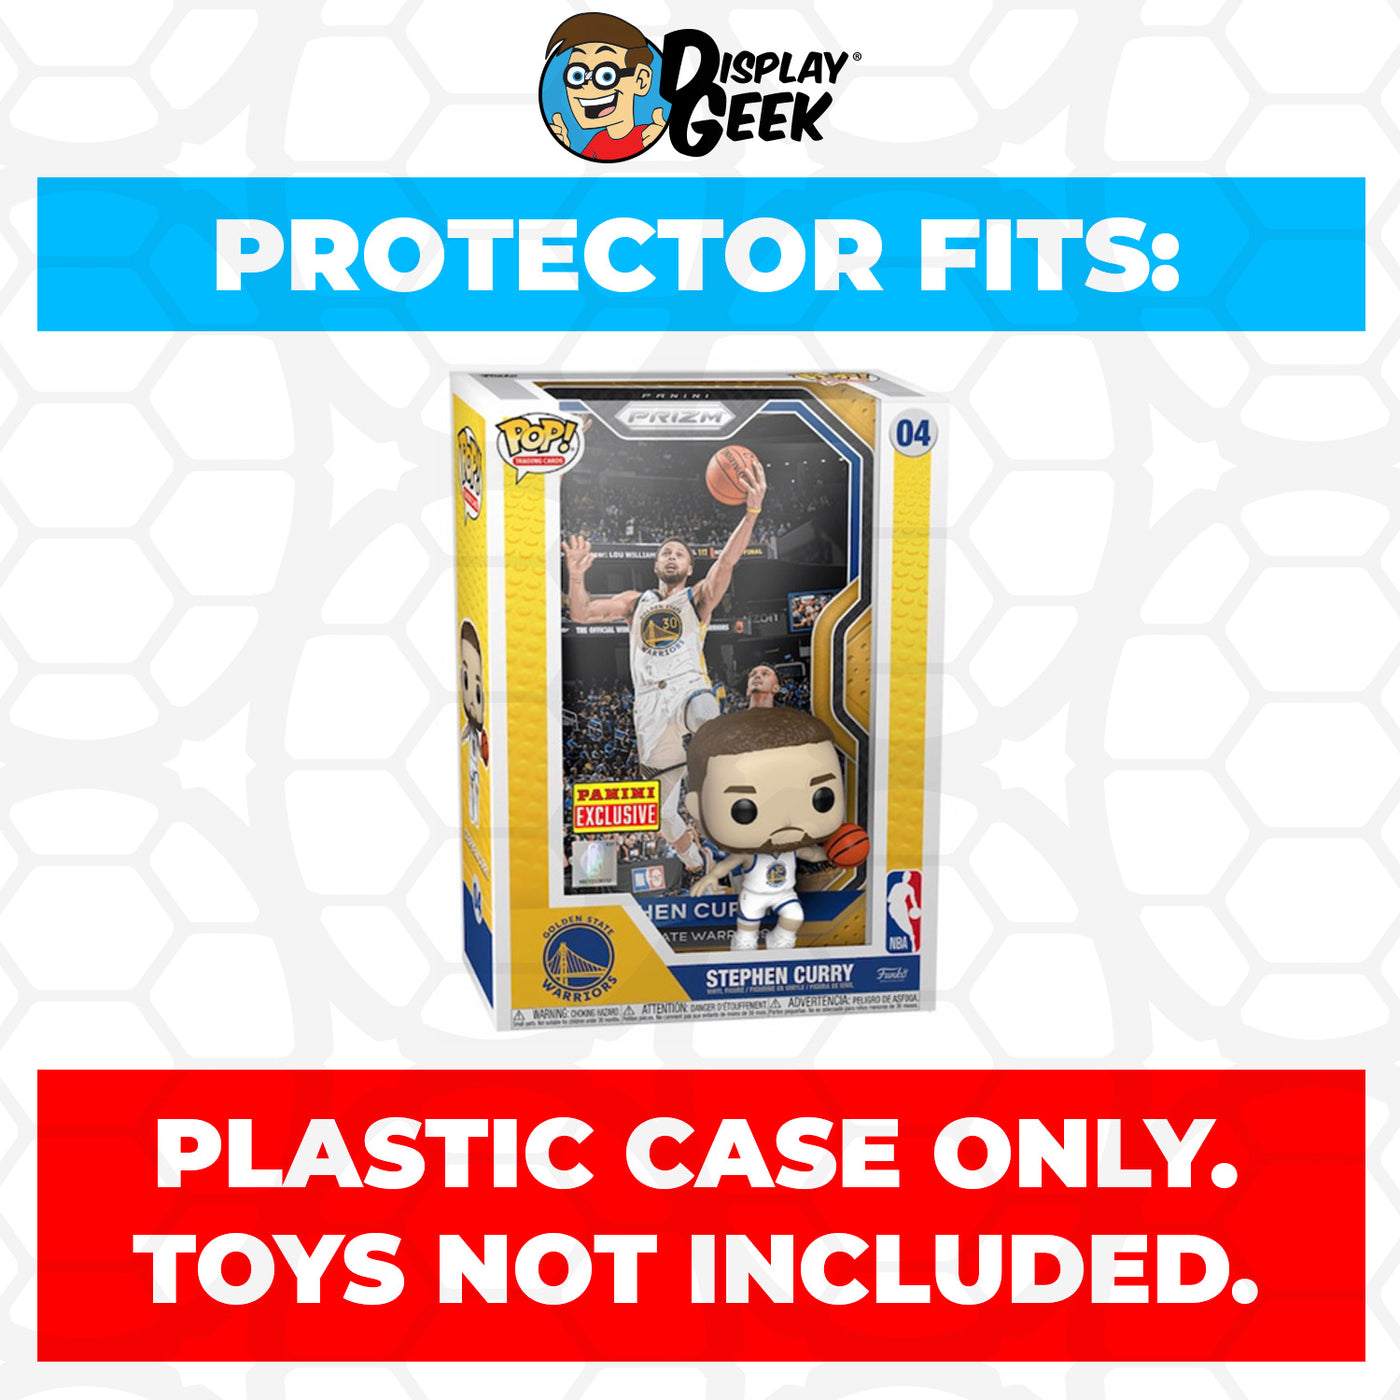 Pop Protector for Stephen Curry Golden State Warriors #04 Funko Trading Cards on The Protector Guide App by Display Geek